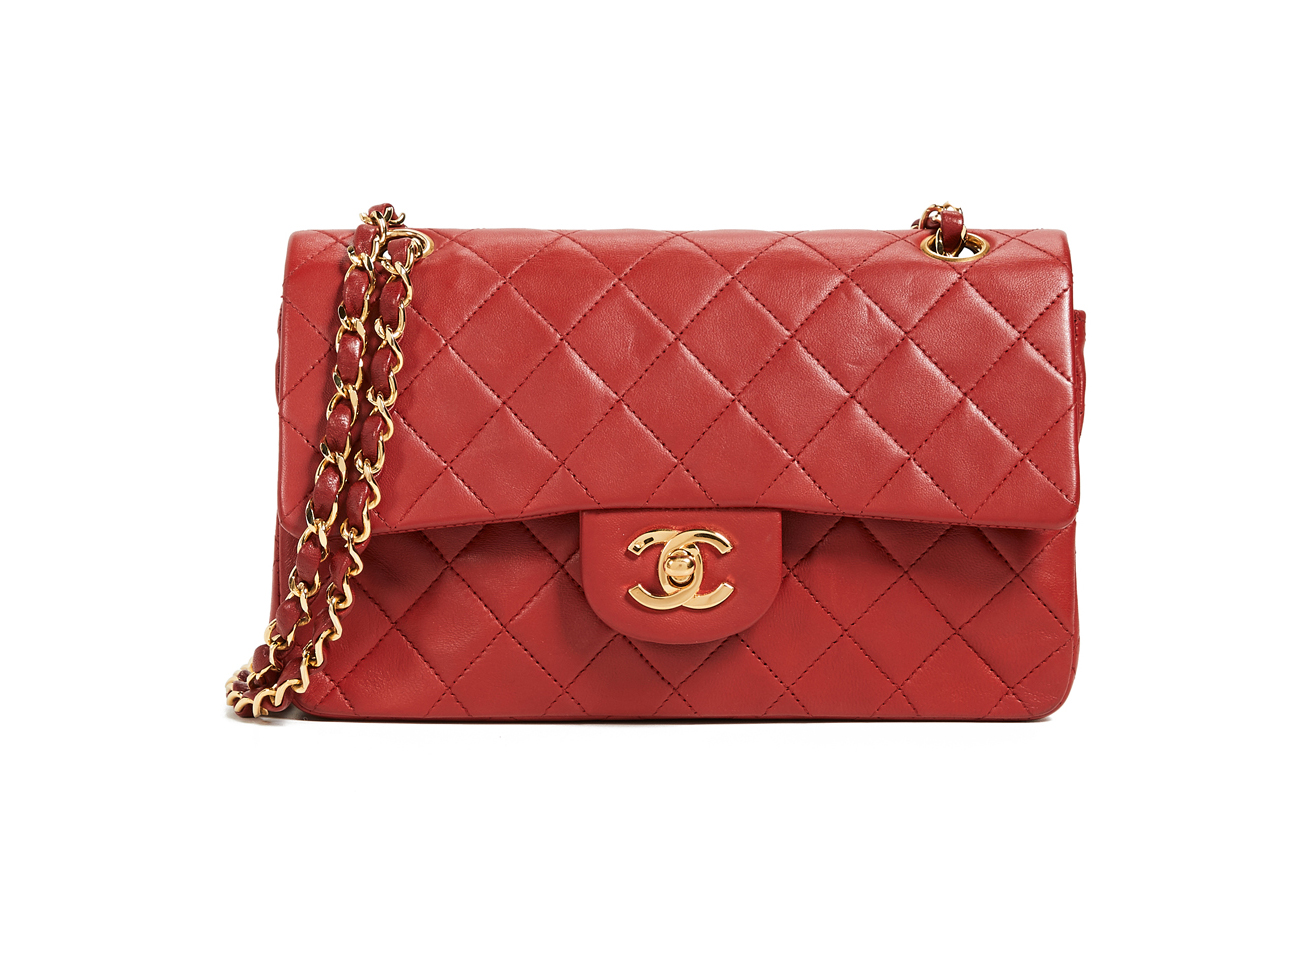 Chanel quilted bag in red